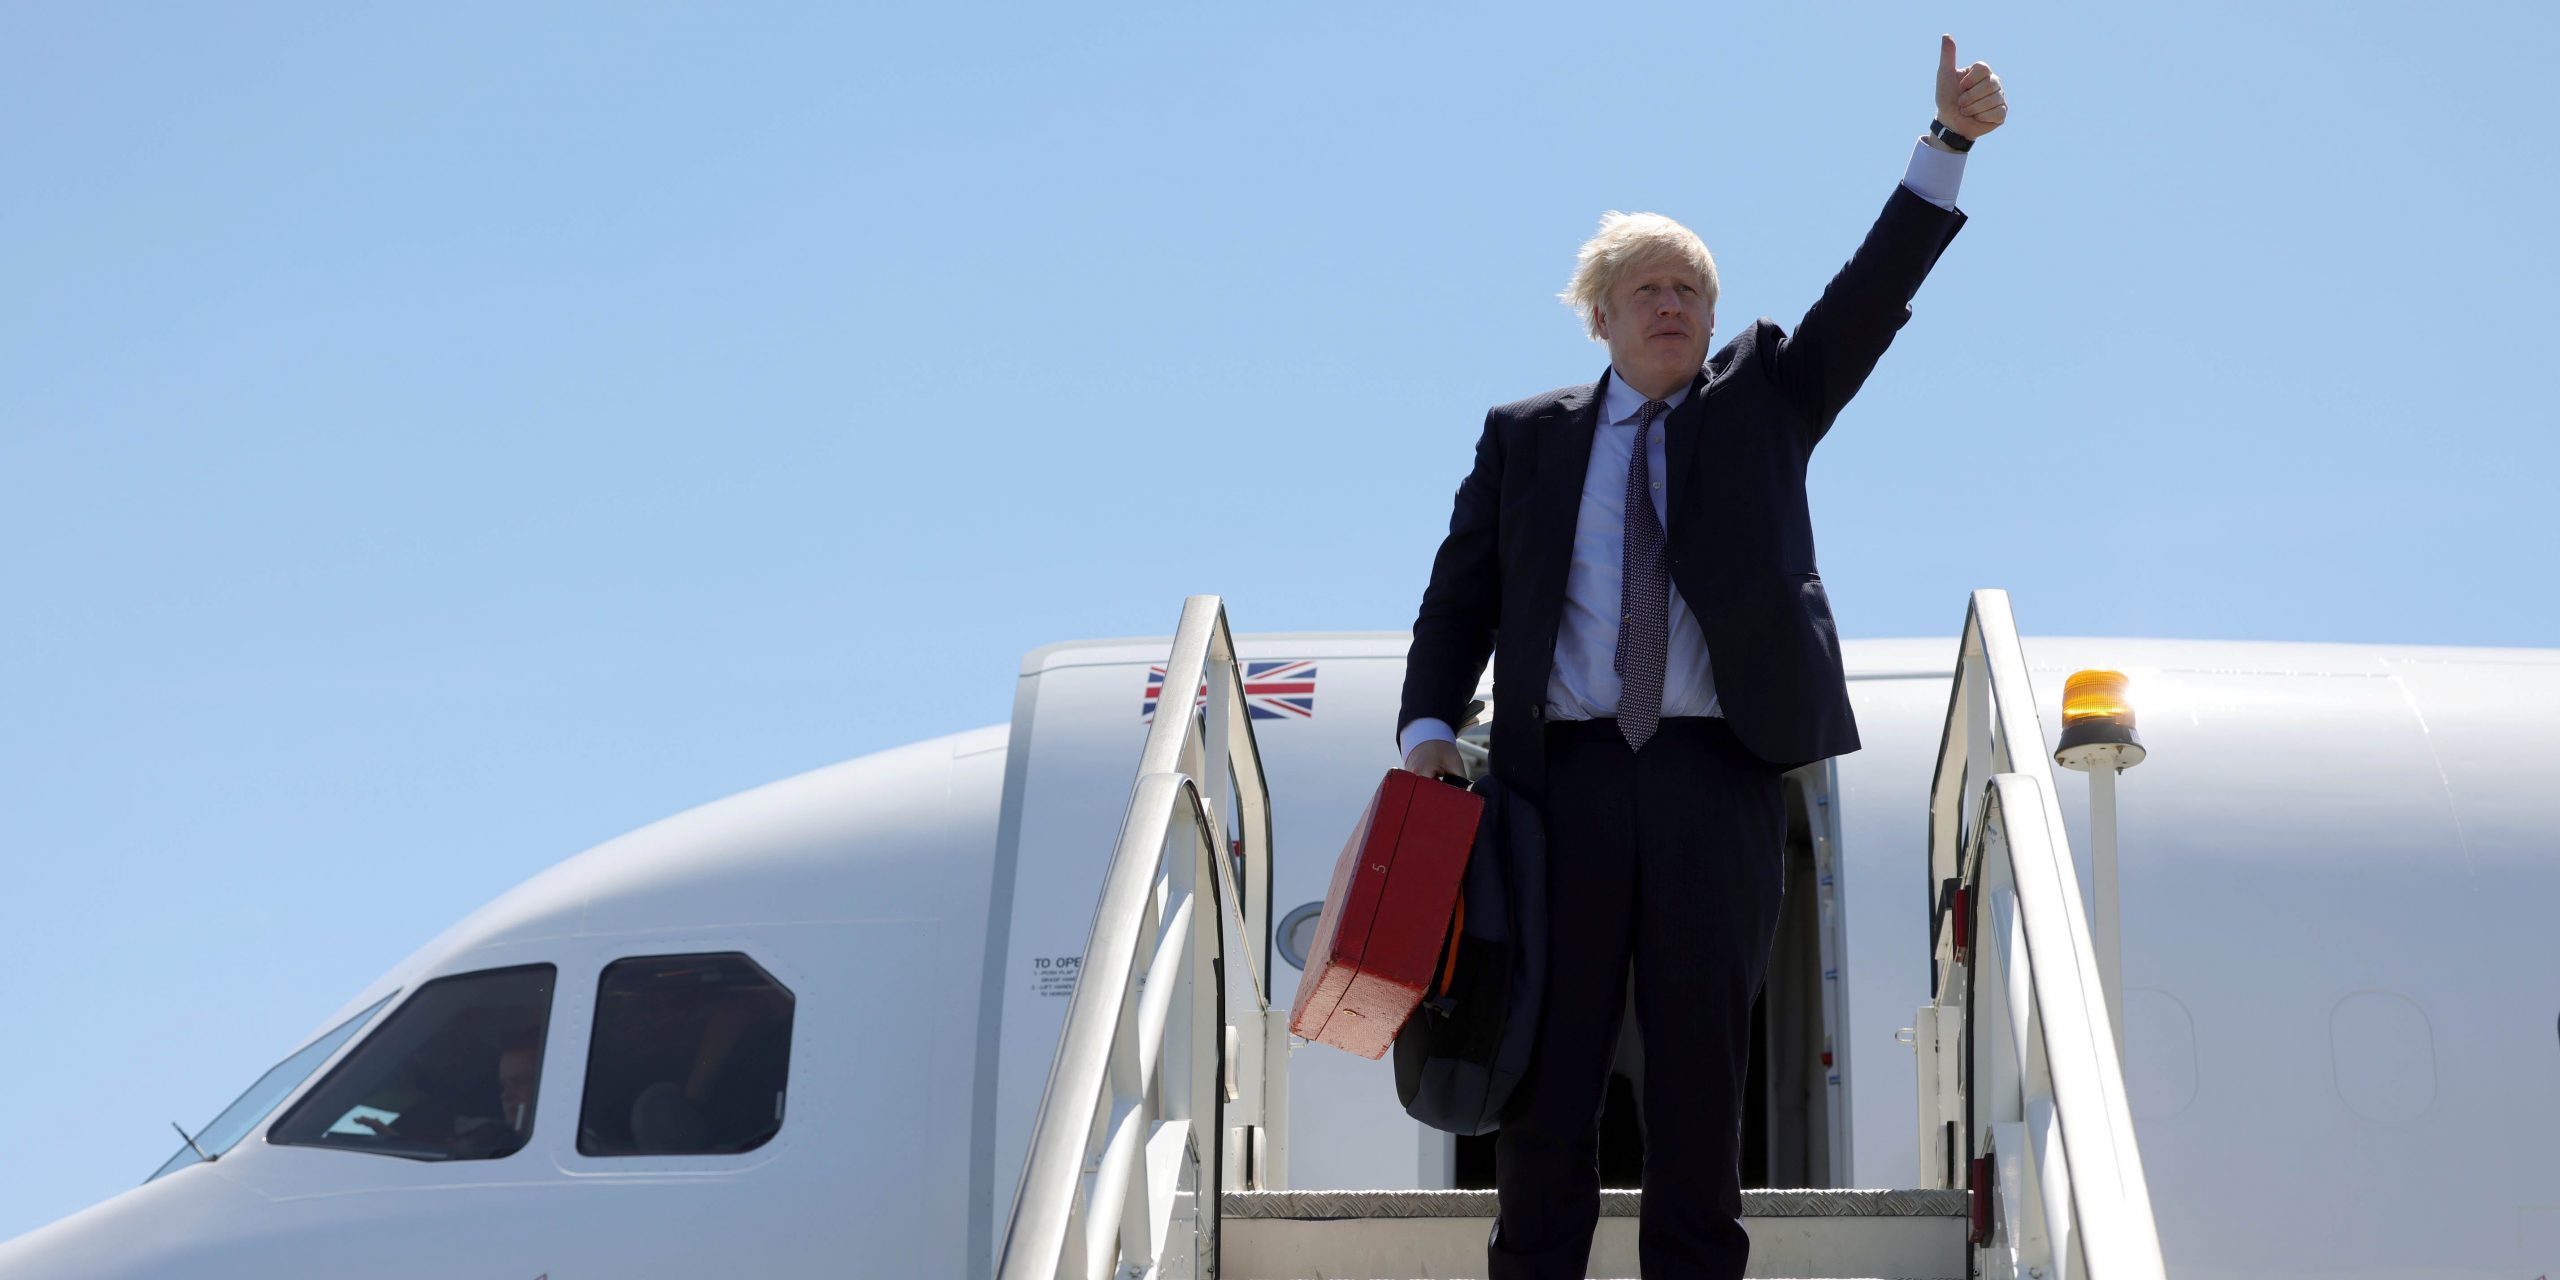 Boris Johnson gives a thumbs-up from the steps of an aircraft